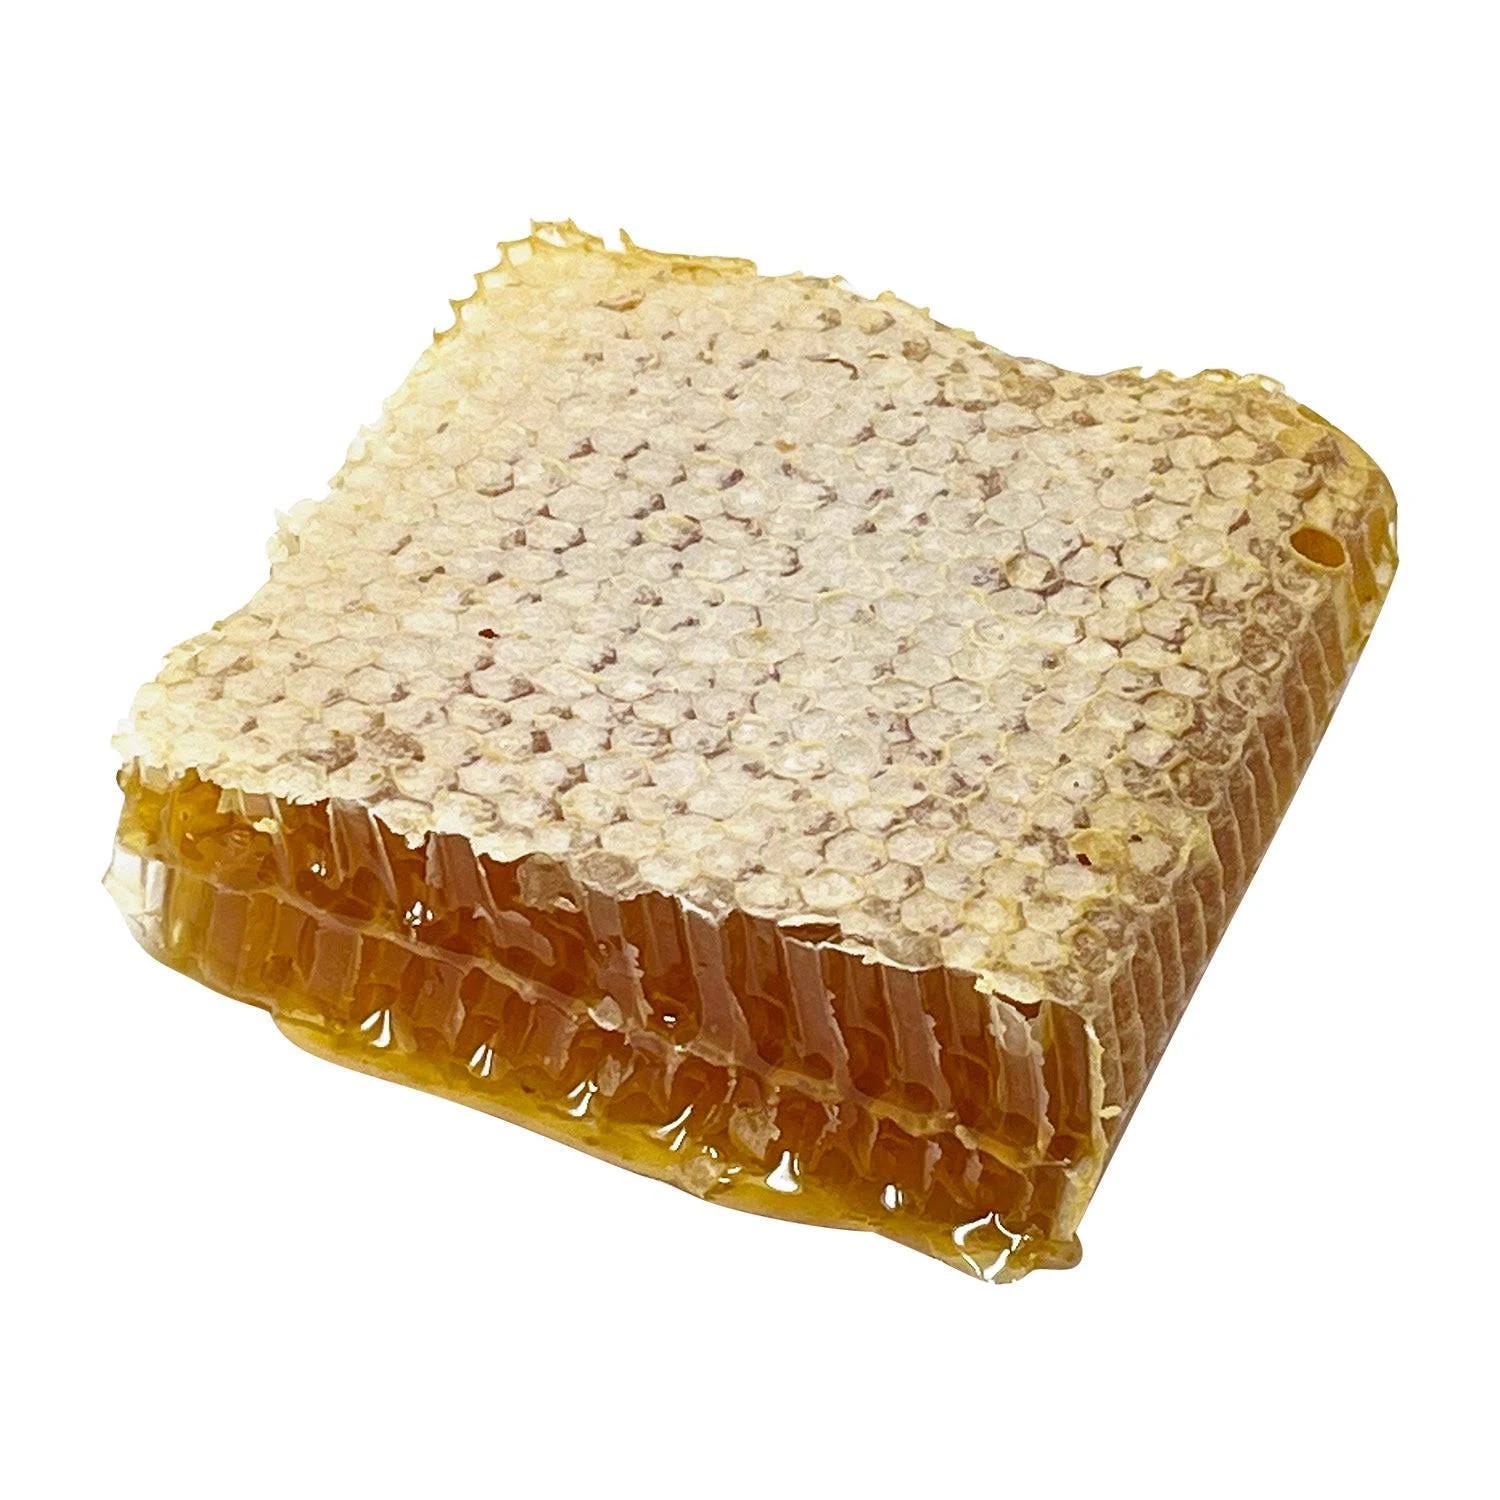 Pure Florida Wildflower Honeycomb: Gourmet Honey in Its Most Natural Form | Image